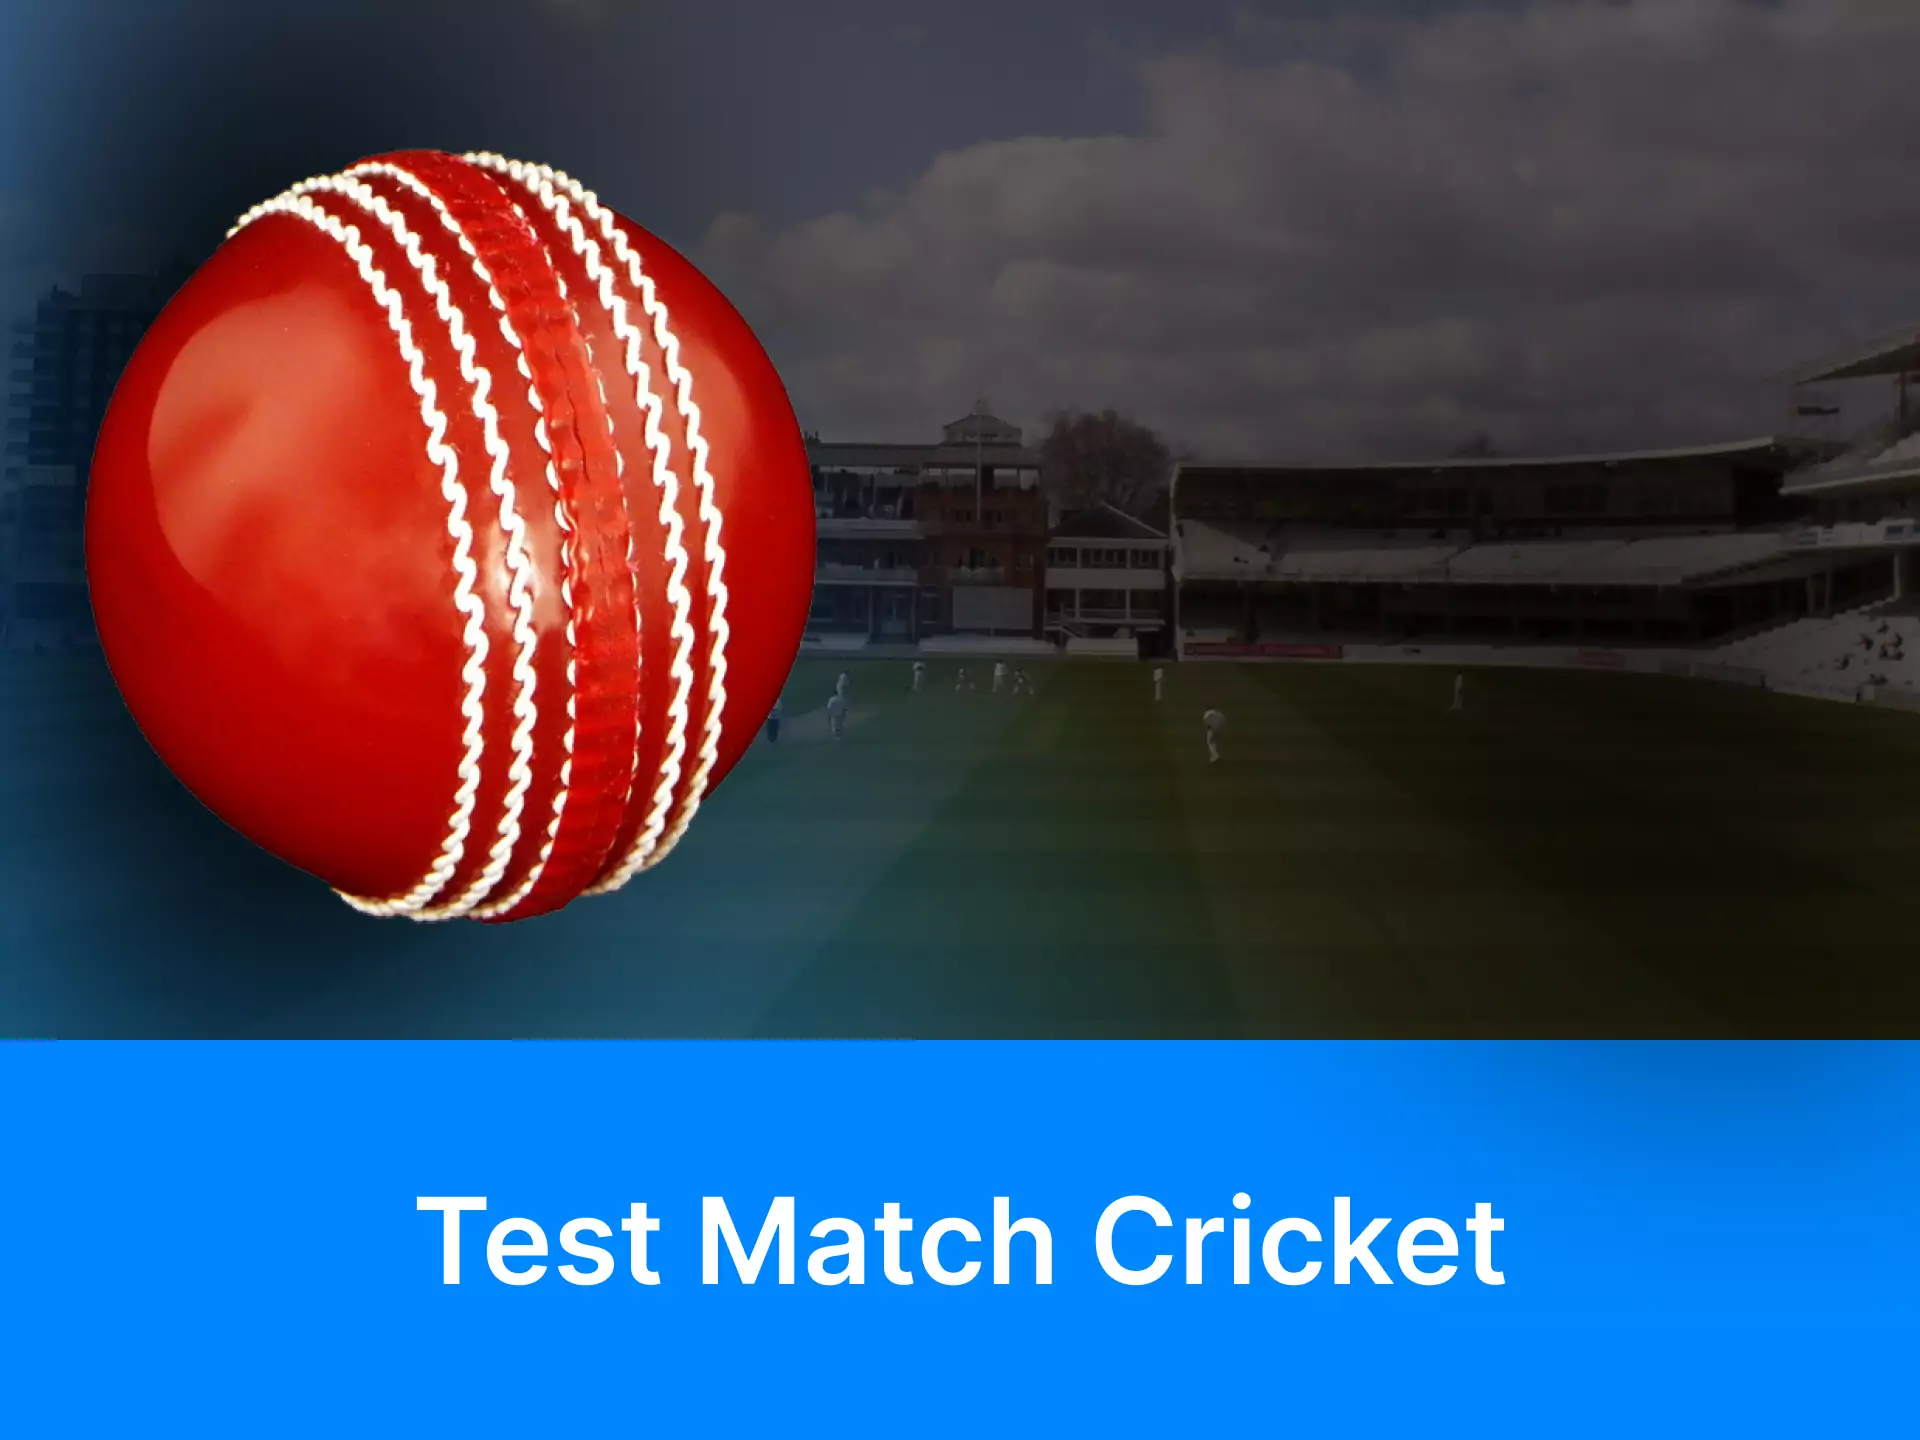 Find out why it was and still is important to play the format of Test Match cricket.